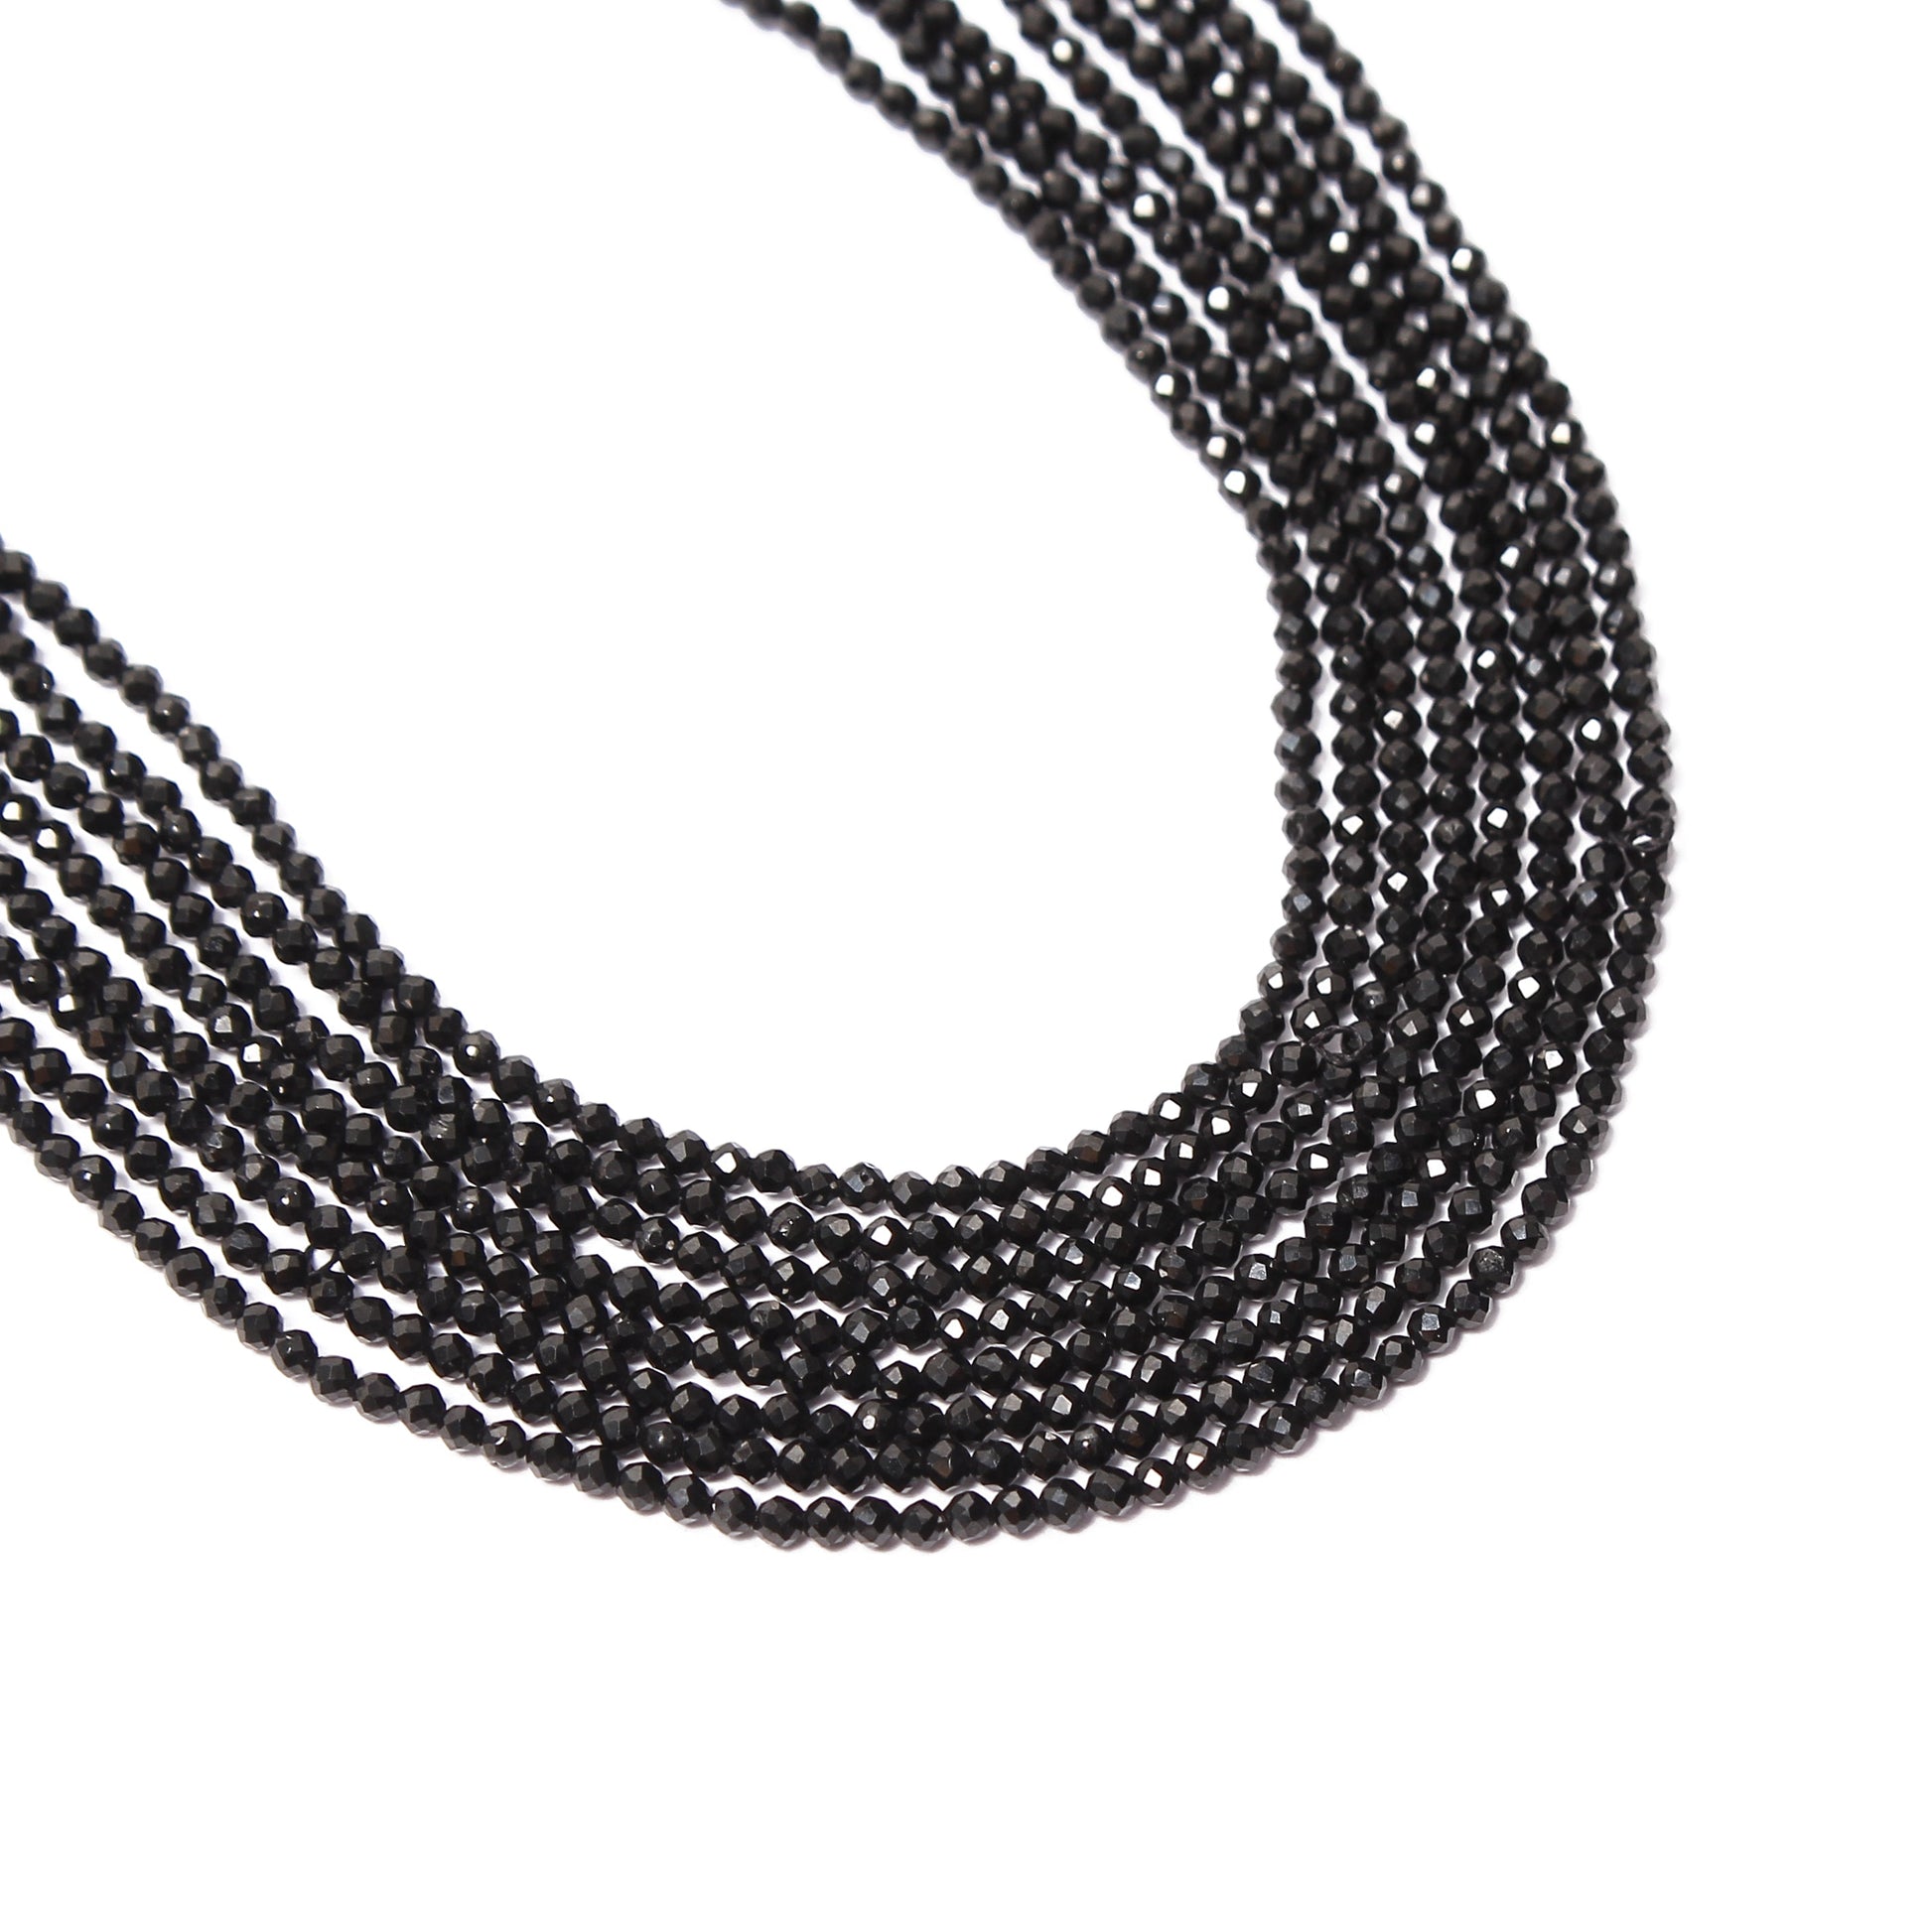 Black Spinel Faceted Beads Necklace, Black Spinel Round Beads Necklace, Multi Layering,Sparkling Black Beads Silver Necklace GemsRush